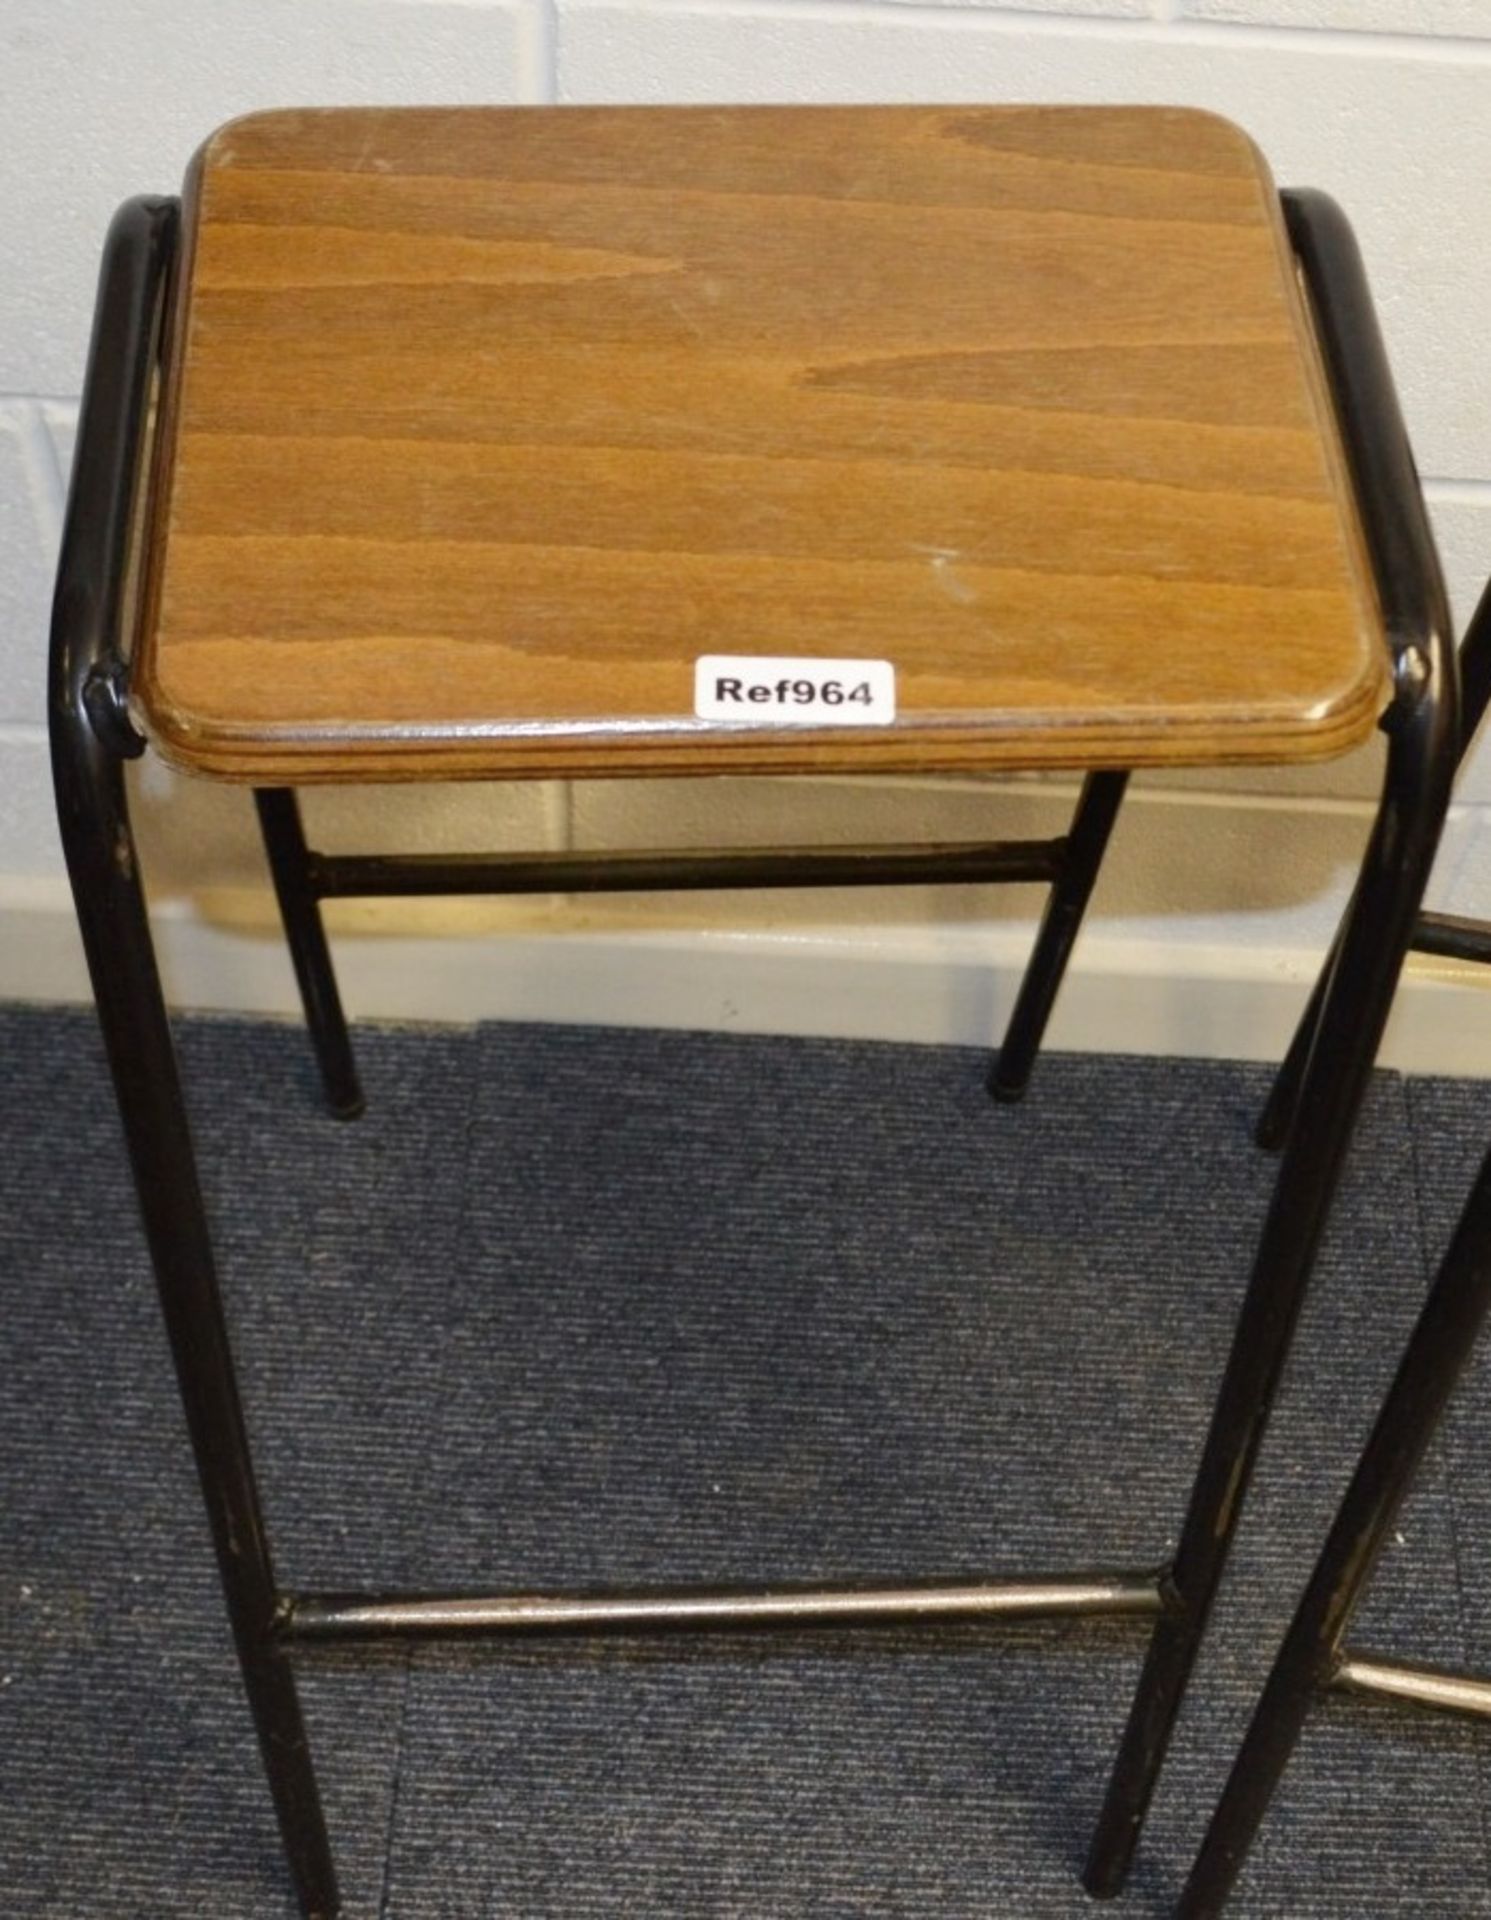 2 x Trainspotters Branded Stacking Bar Stools - Used - Dimensions (approx) H74 x W36 x D43cm - - Image 2 of 4